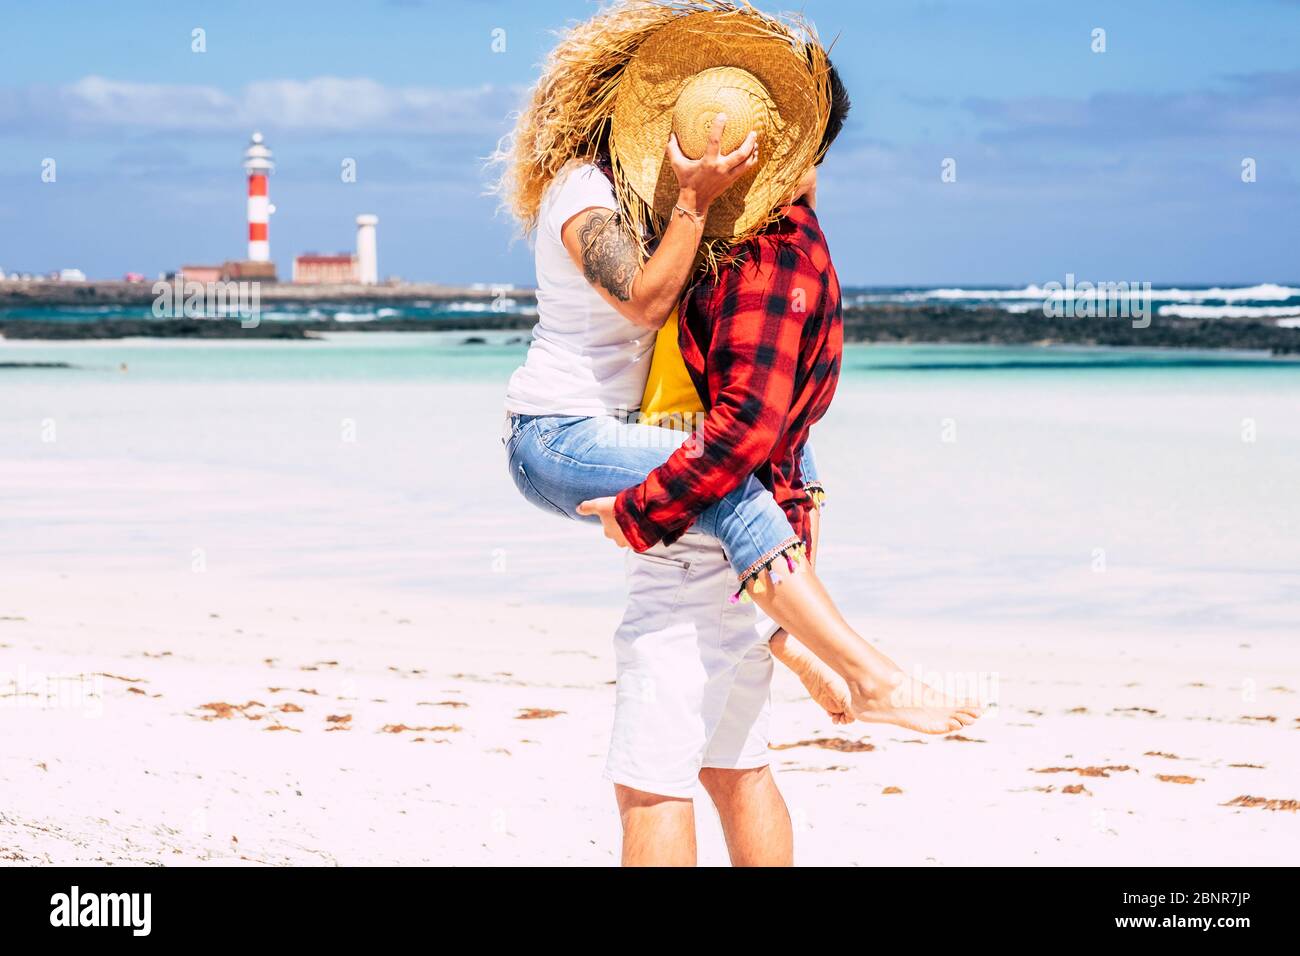 Couple kissing with love - concept of summer holiday vacation or honeymoon for people in relationship - background with beach and blue ocean and sky - man carry woman with curly hair Stock Photo